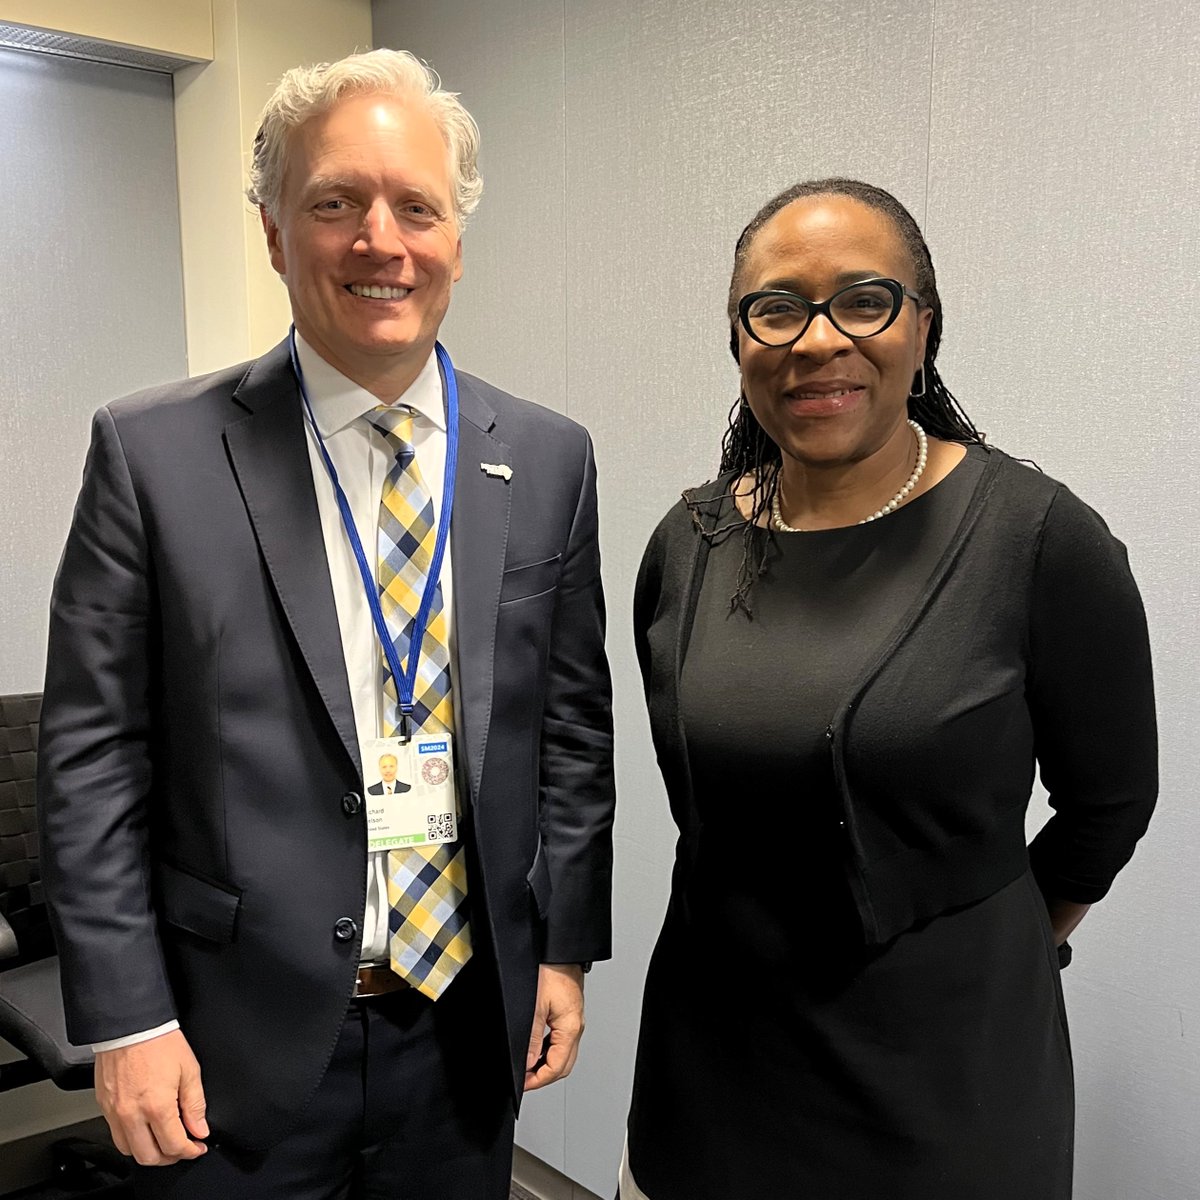 Coordinator Richard Nelson kicked-off our week at the #WBGMeetings catching up w/ #PowerAfricaPartner @RMIAfrica's @Ije_ikoku_okeke discussing how our partnership can boost #RenewableEnergy projects in Africa - making them more viable, cutting costs & enhancing access to finance.